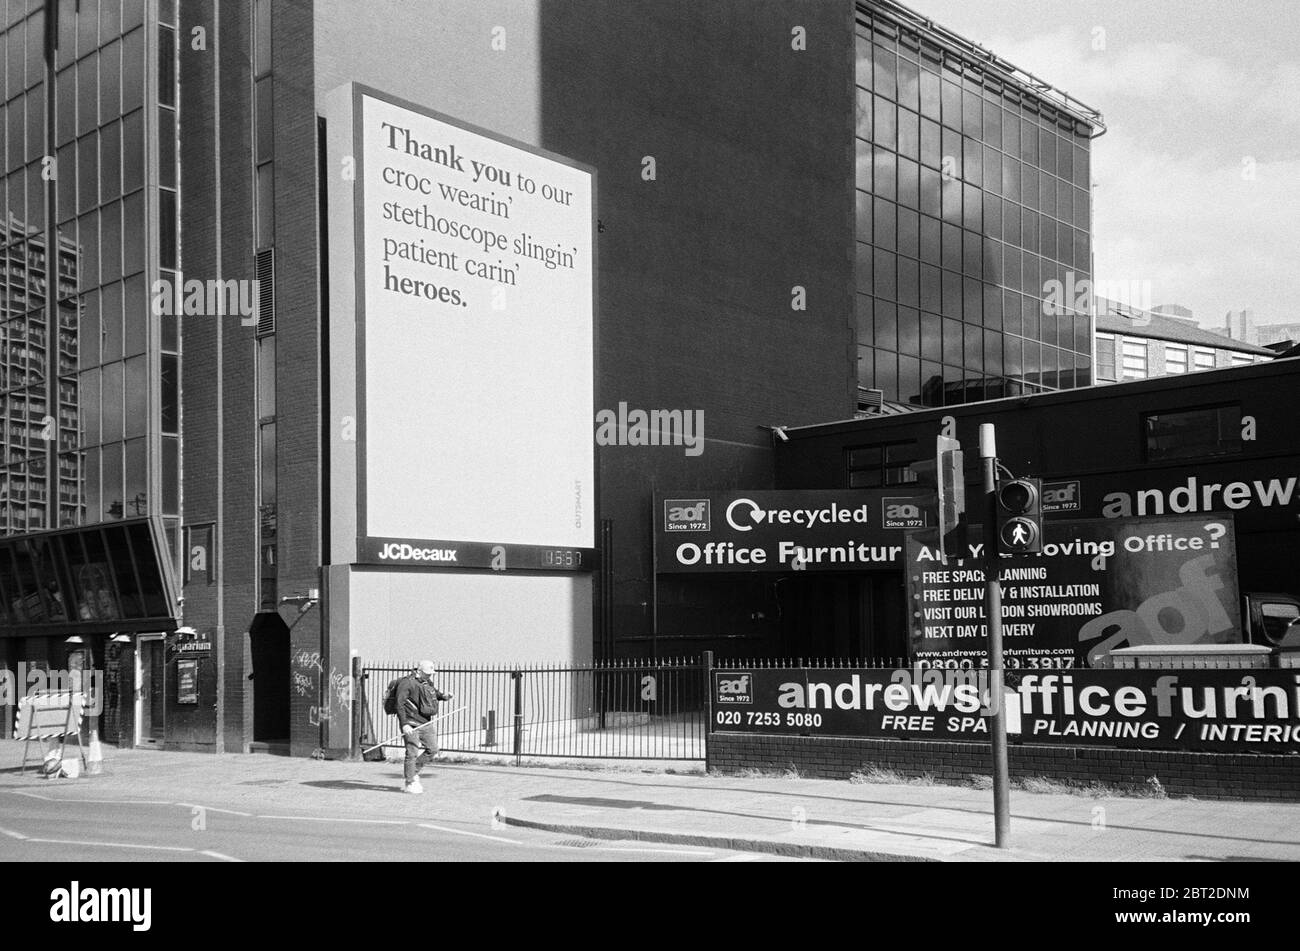 Old Street in Shoreditch, East London UK, with an advertising hoarding displaying a mesage of thanks to key workers during the coronavirus pandemic Stock Photo